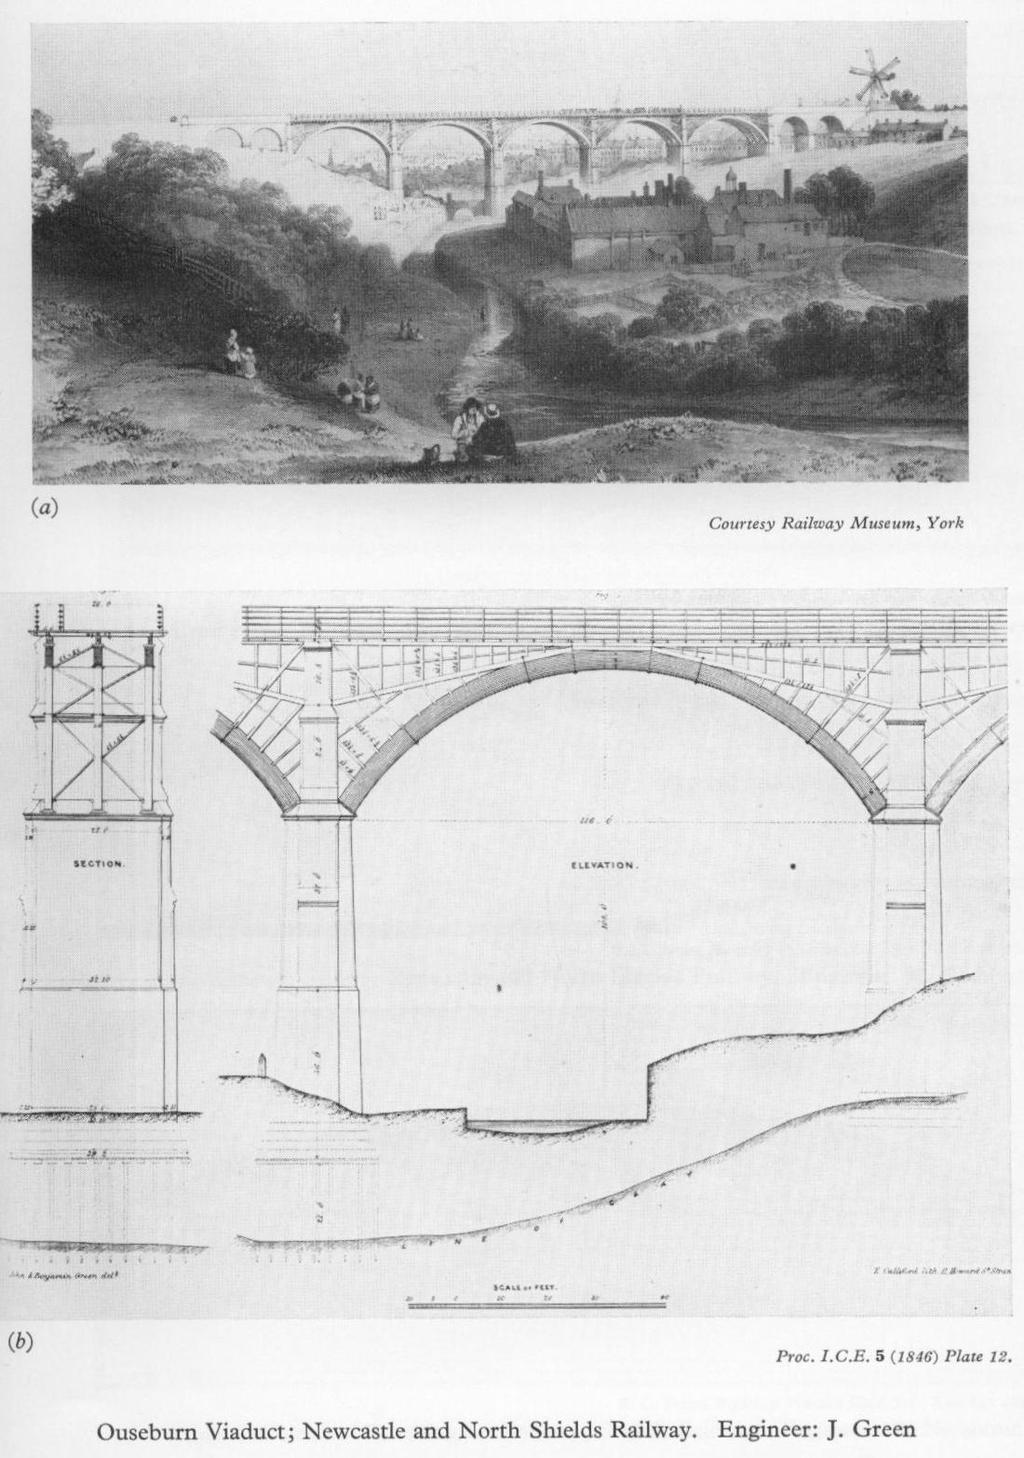 3 / 18 Performance of old glulam structures in Europe History and development The first railway bridges in England and Scotland were built using glulam arches as the main loadcarrying members.